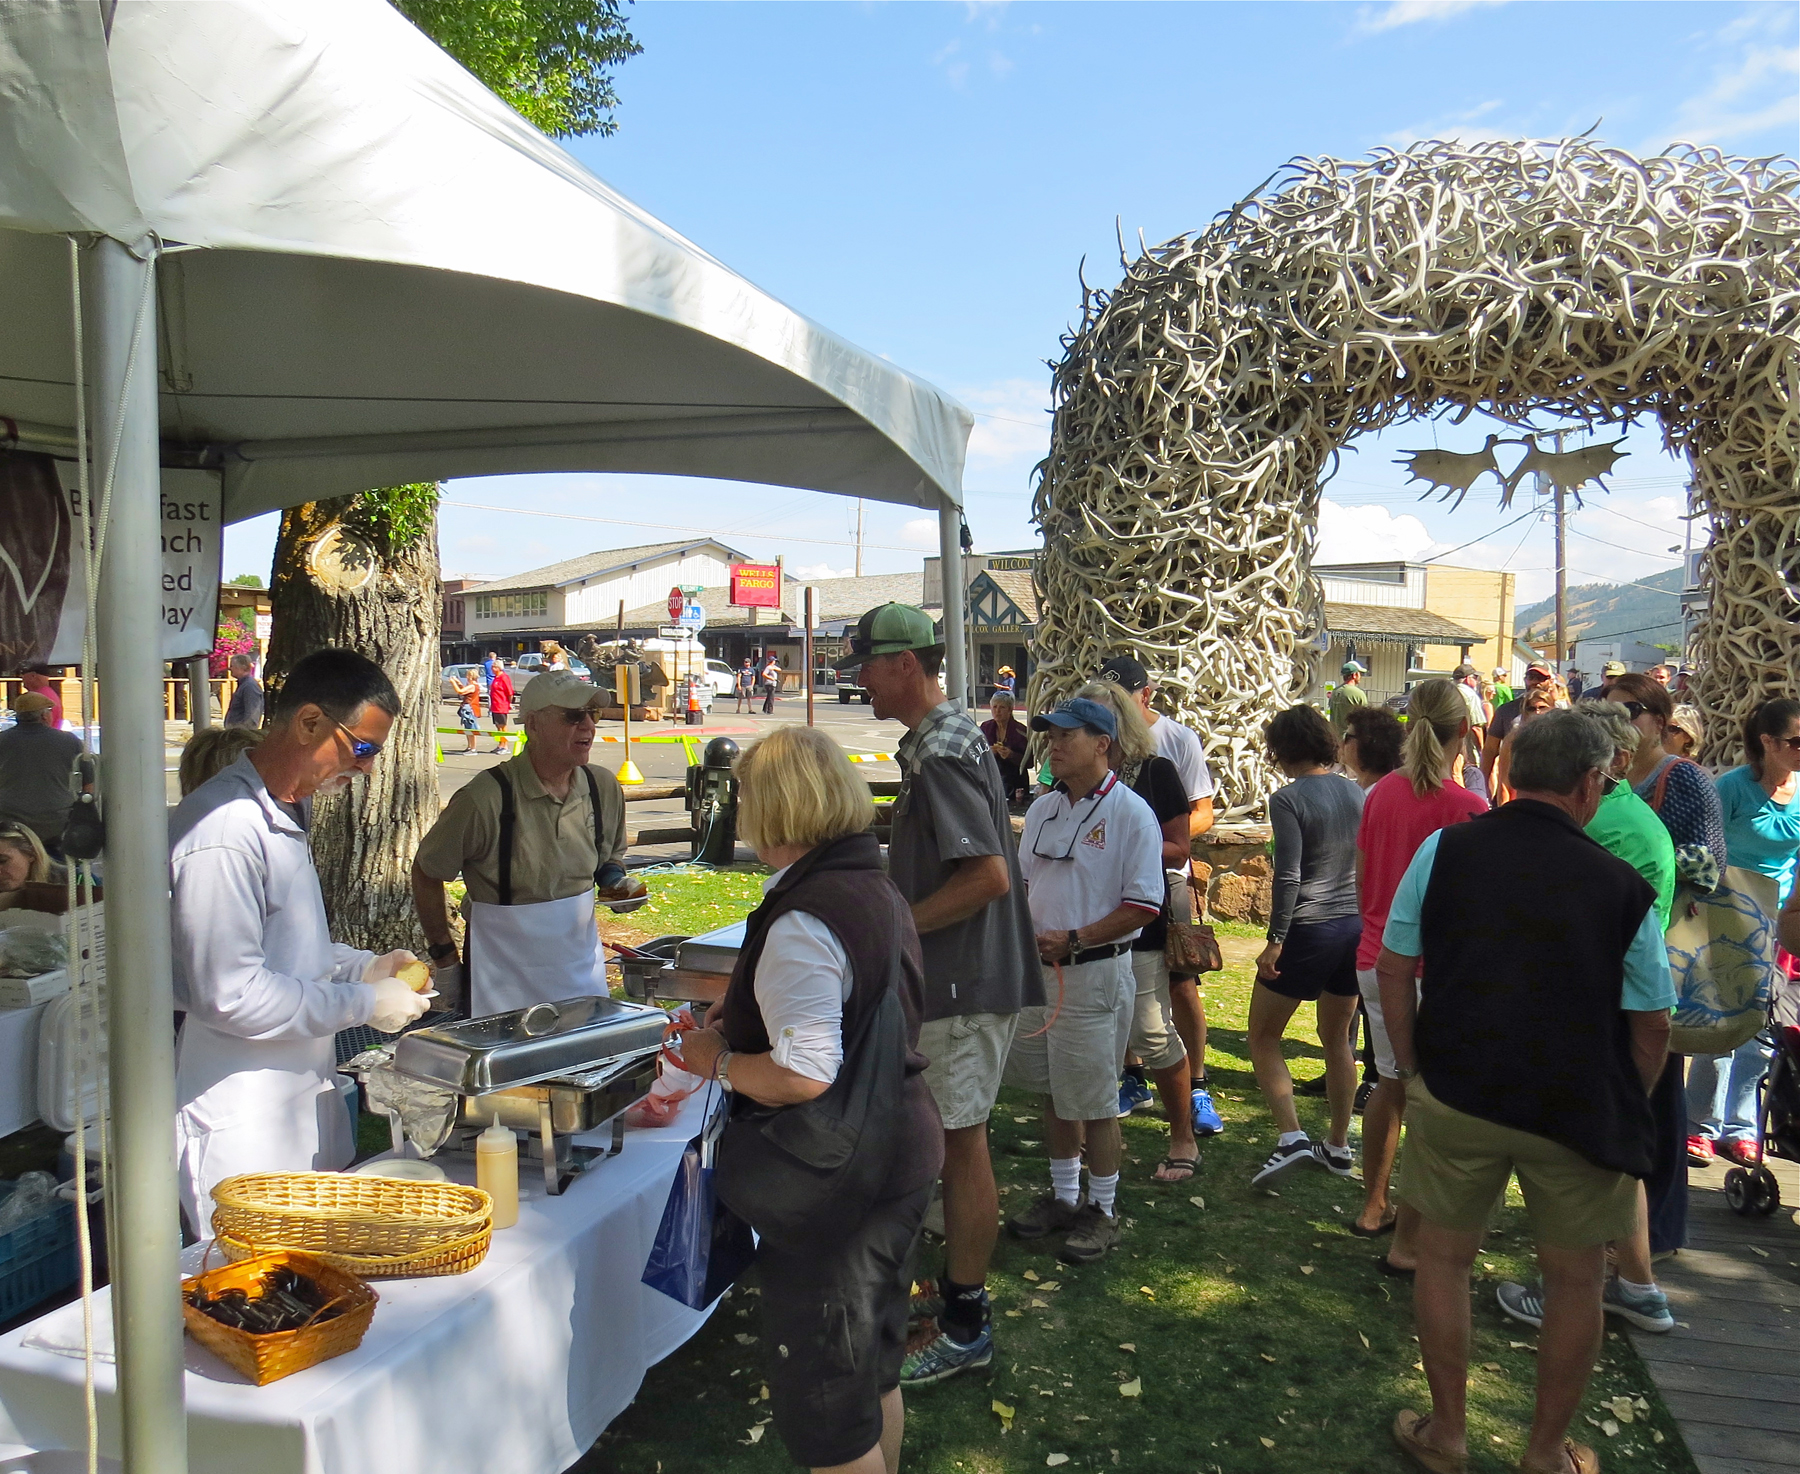 The Taste of the Tetons event takes place on Jackson Town Square each year, attracting foodies of all ages to taste local chefs’ best-of-the-West culinary creations in an open-air tasting fair.